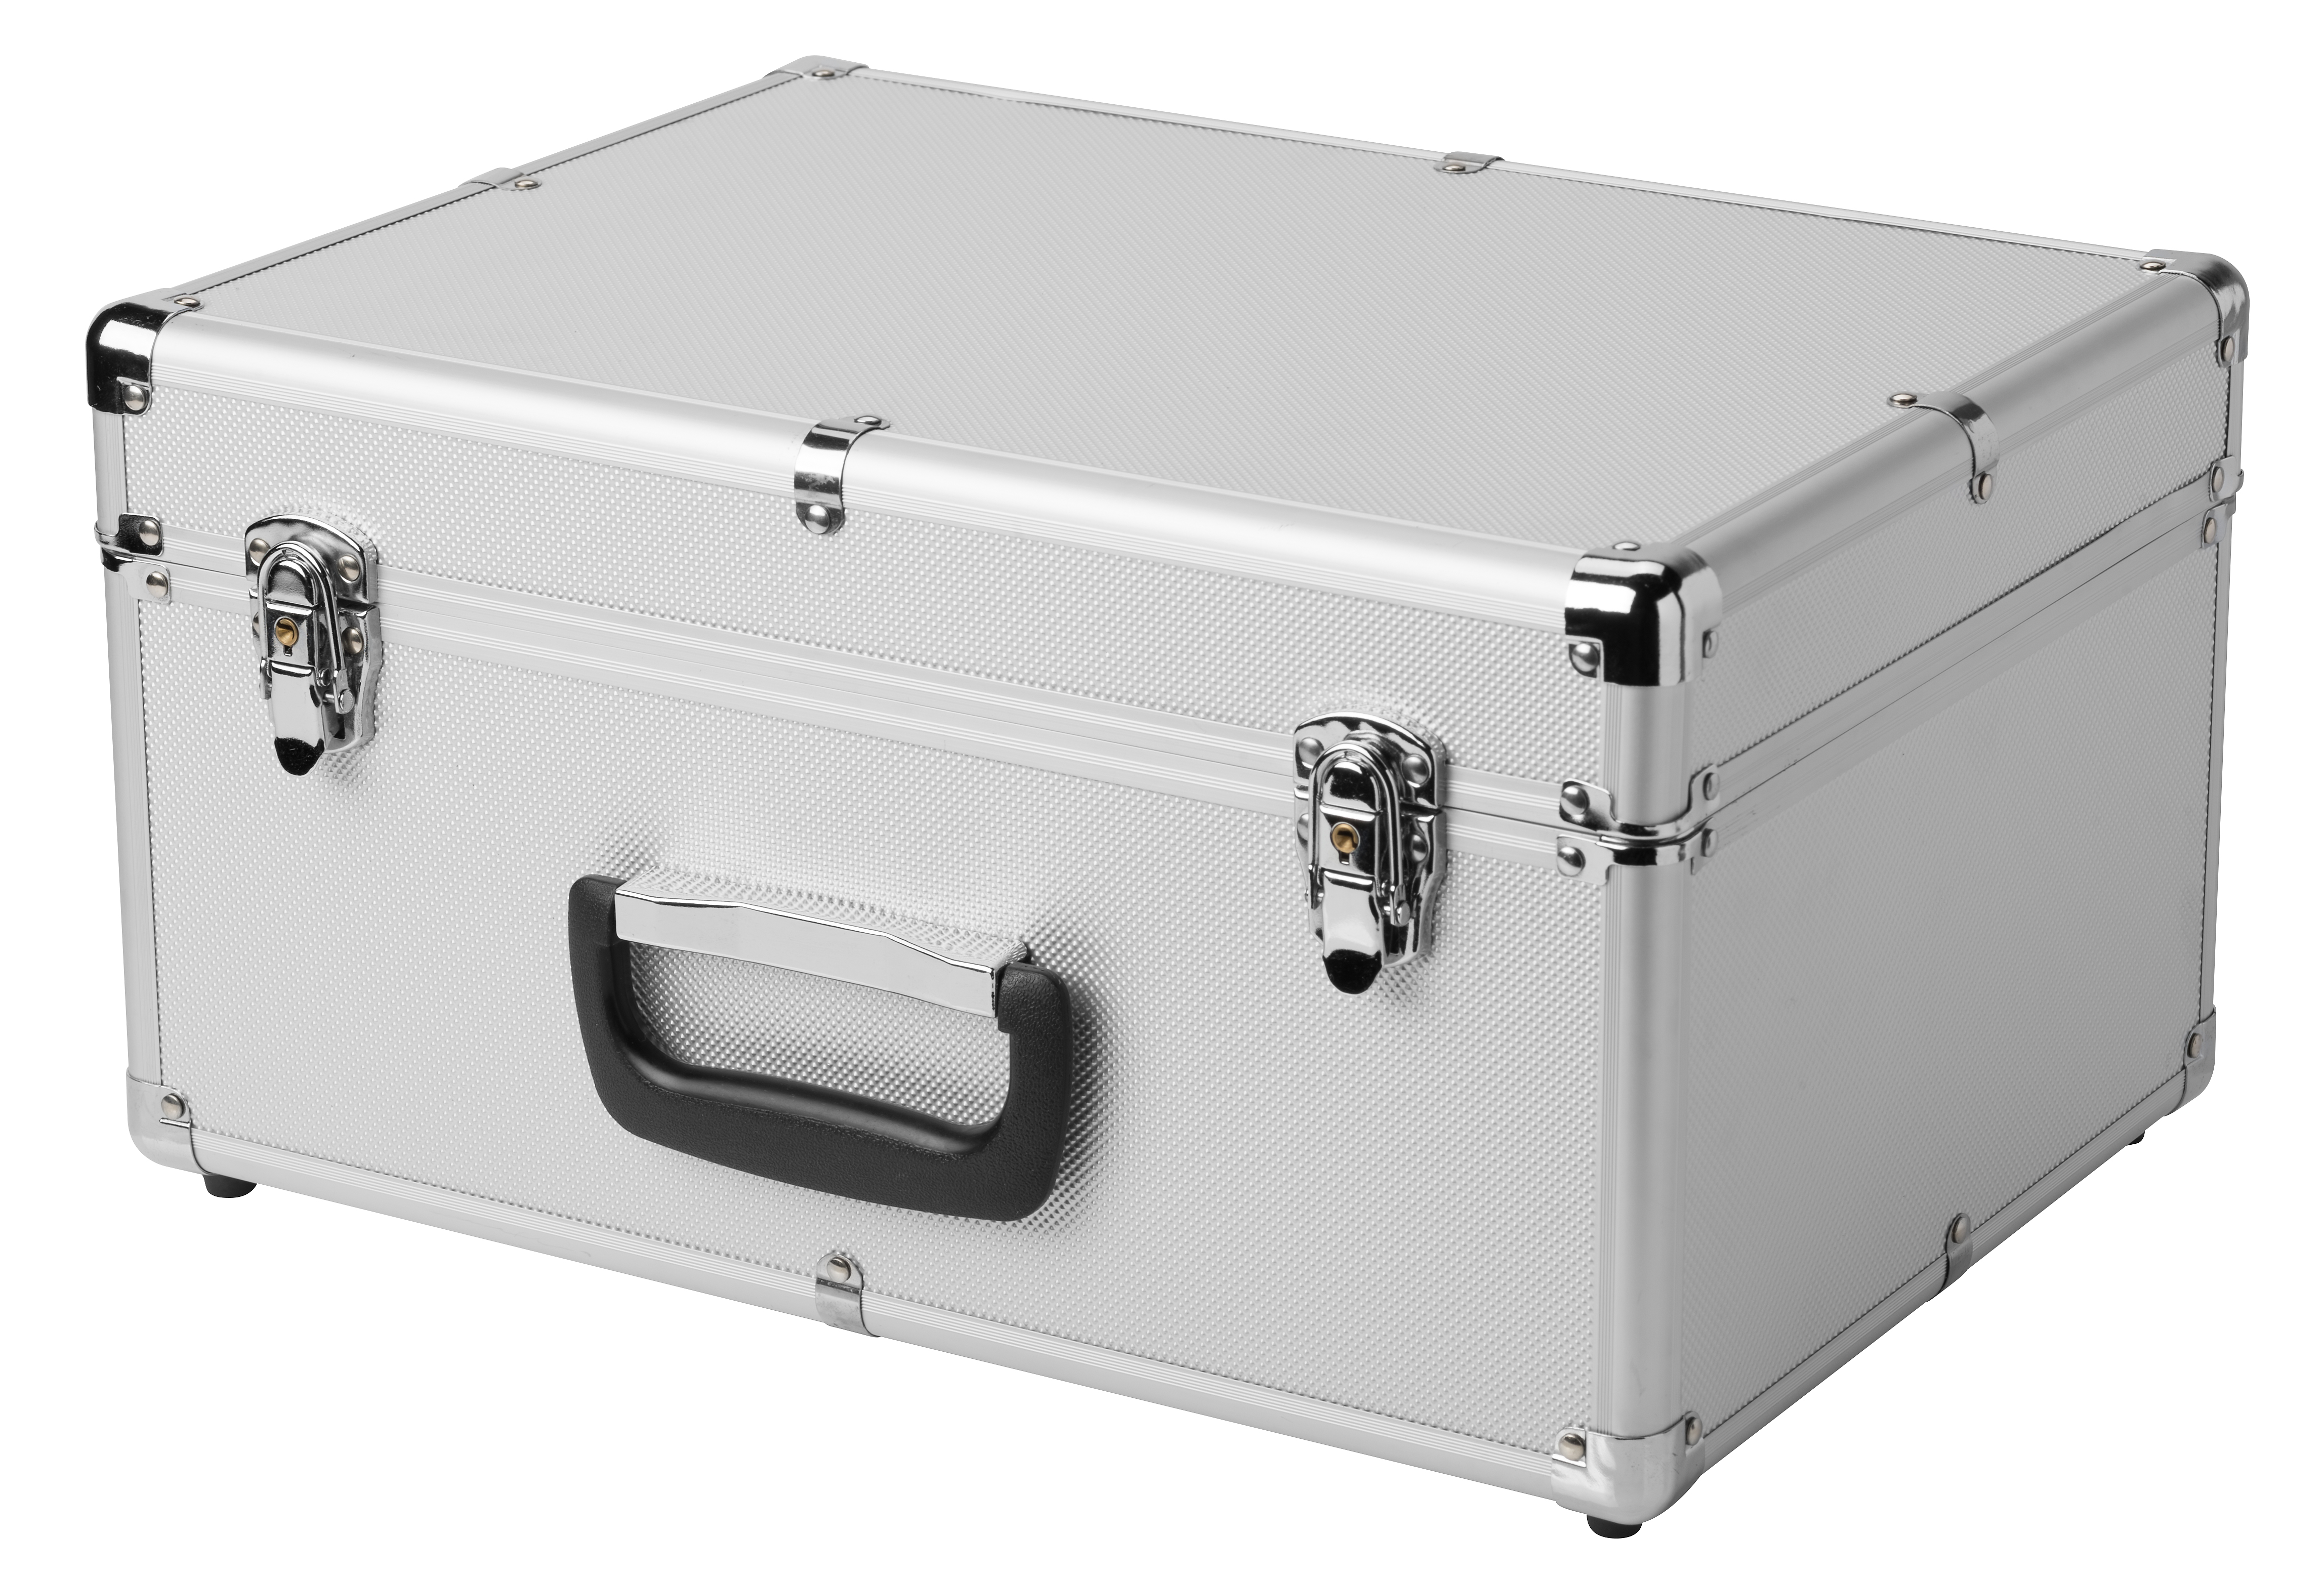 BRESSER Carry Case for Erudit DLX / Researcher microscopes